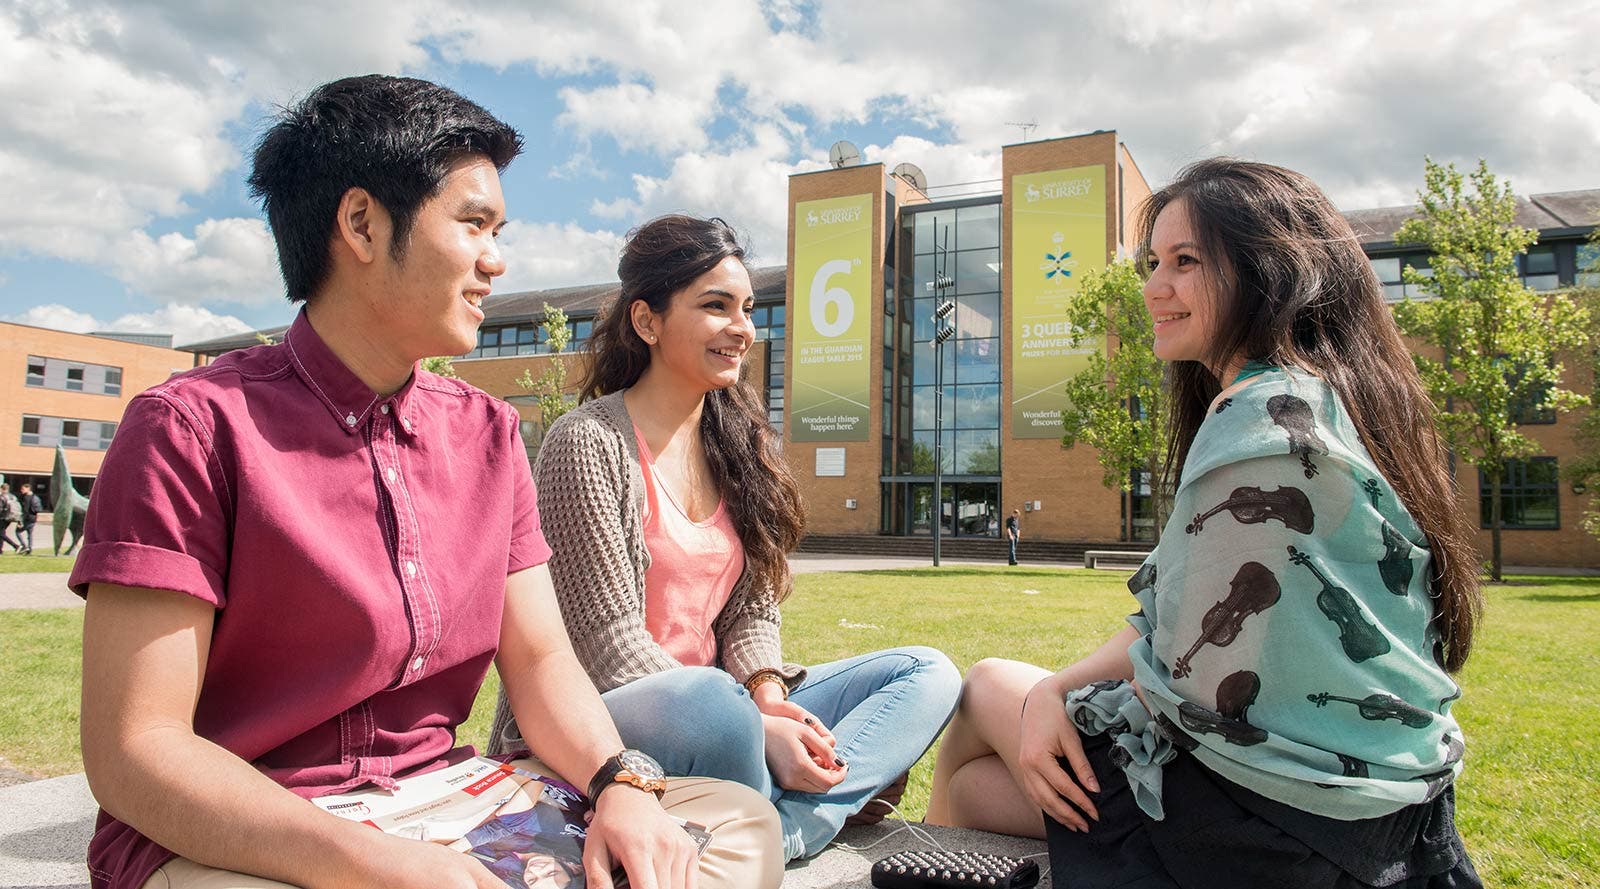 Surrey students sitting on grass outside campus